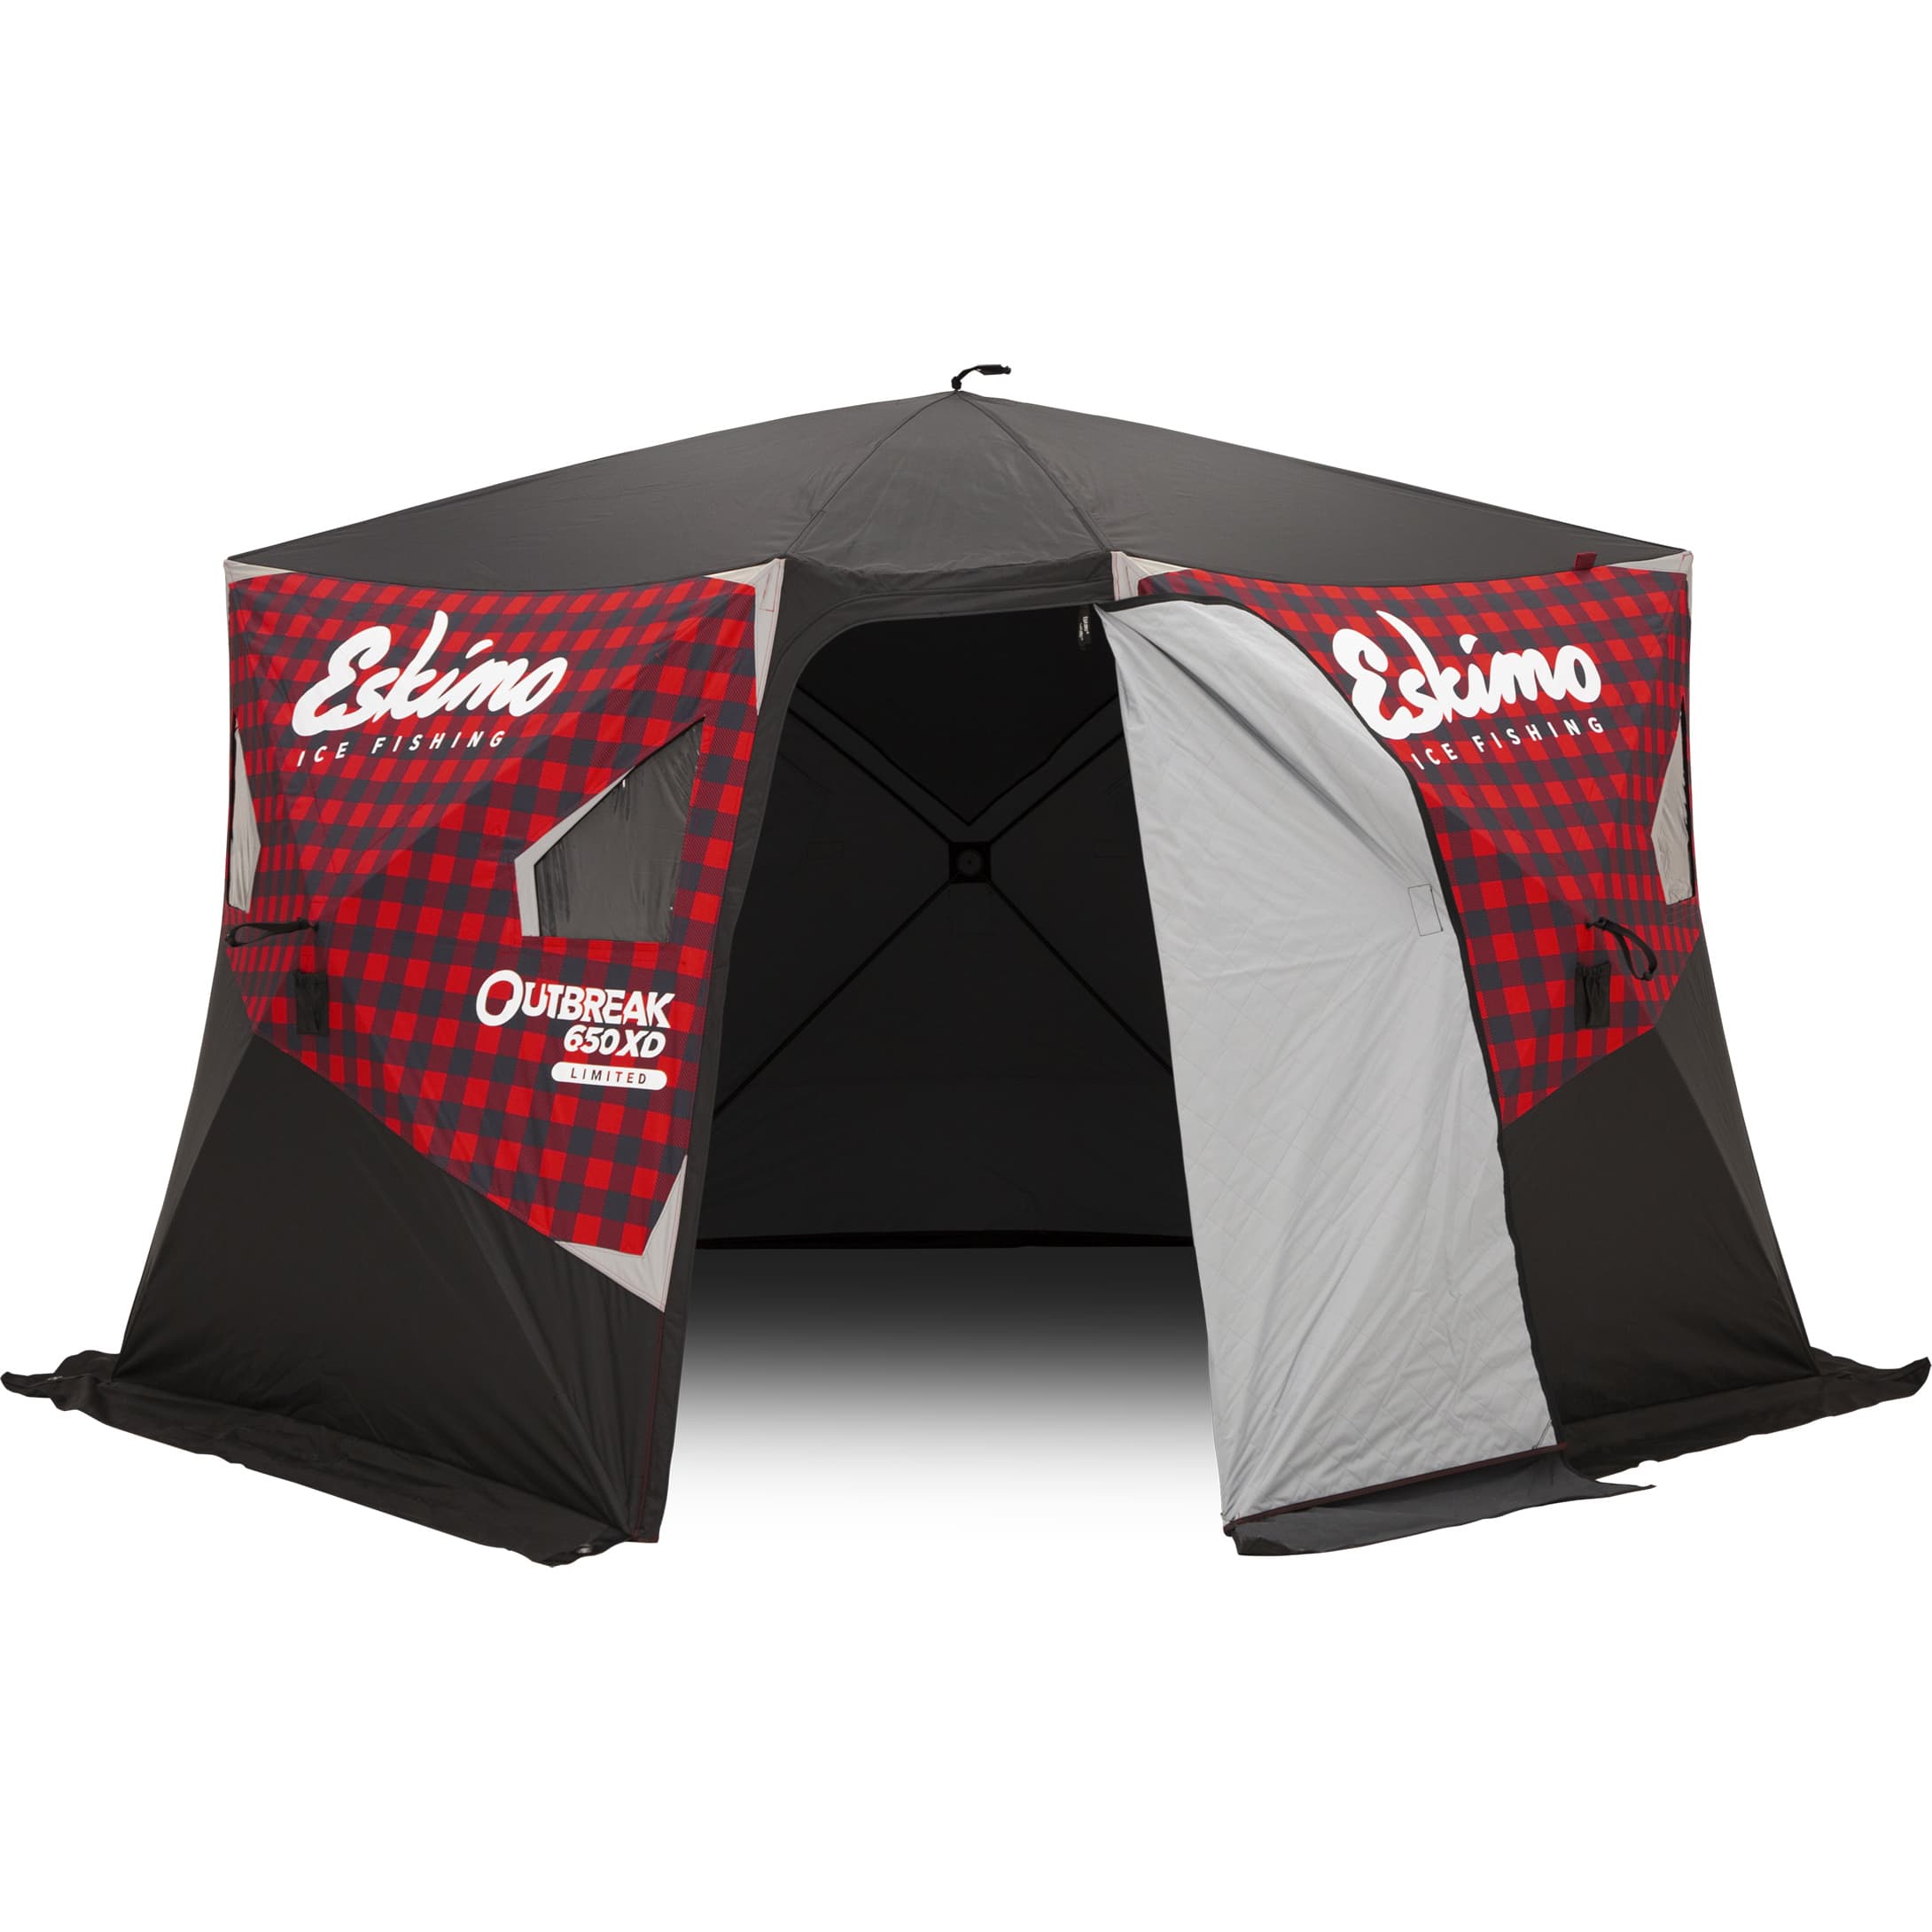 Eskimo Outbreak 350XD Limited Pop-up Portable Insulated Ice Fishing Shelter,  63 sq ft. Fishable Area, 3-4 Person, Red/Black, 126 x 126, Shelters -   Canada